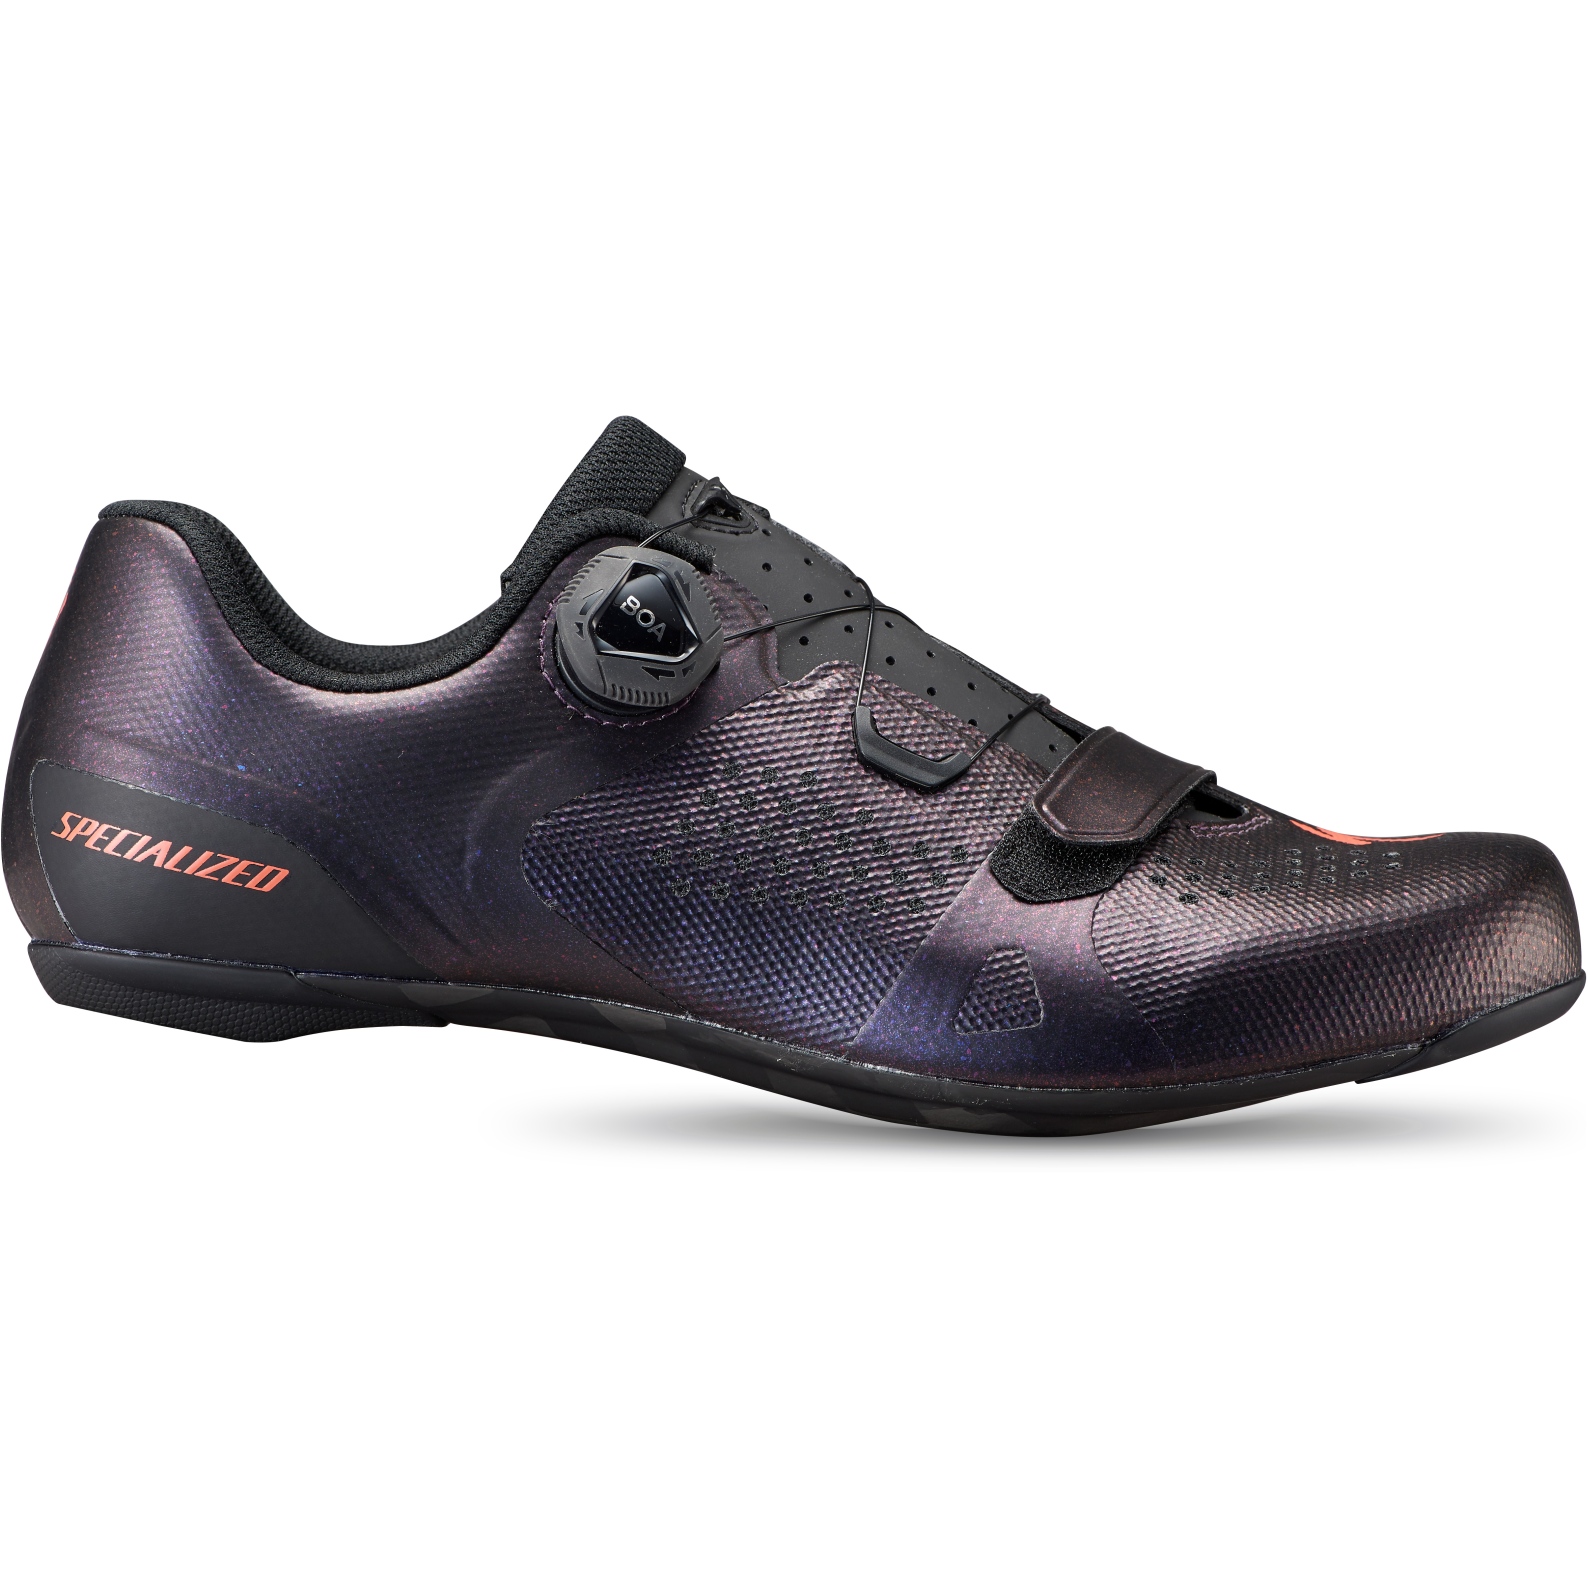 Image of Specialized Torch 2.0 Road Shoe - Black/Starry